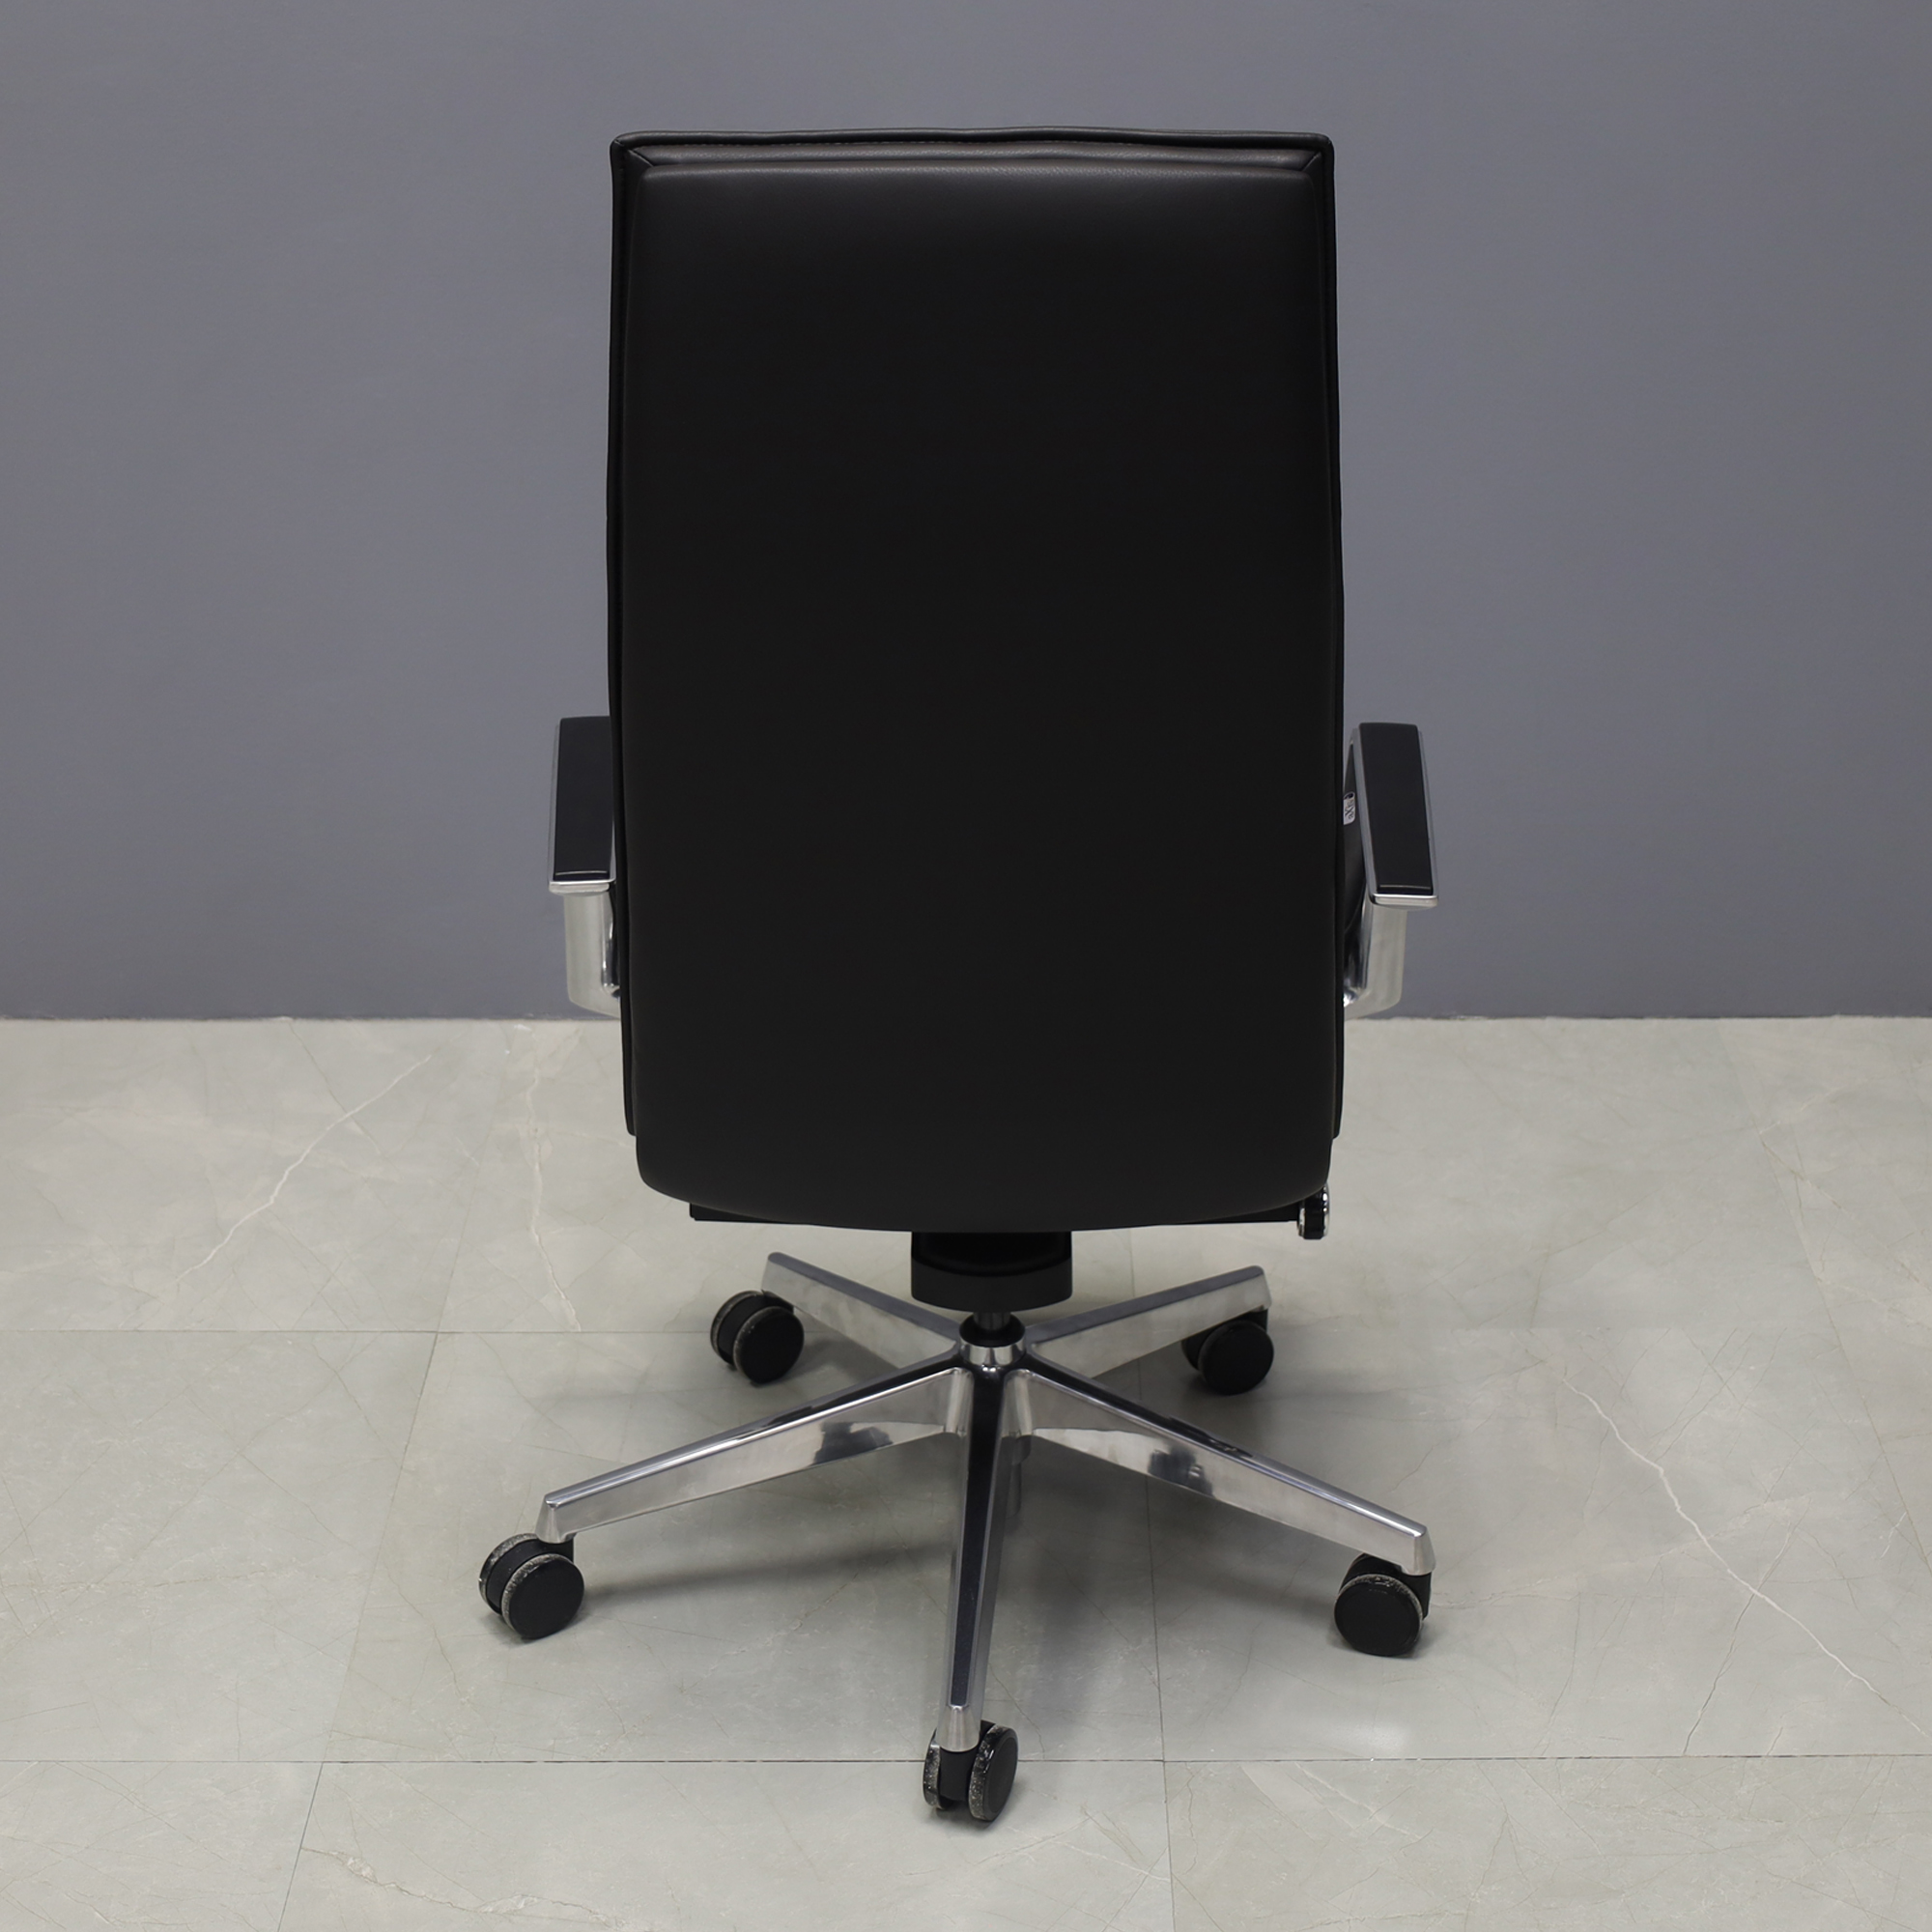 Della High Back Executive Chair in black upholstery, shown here.